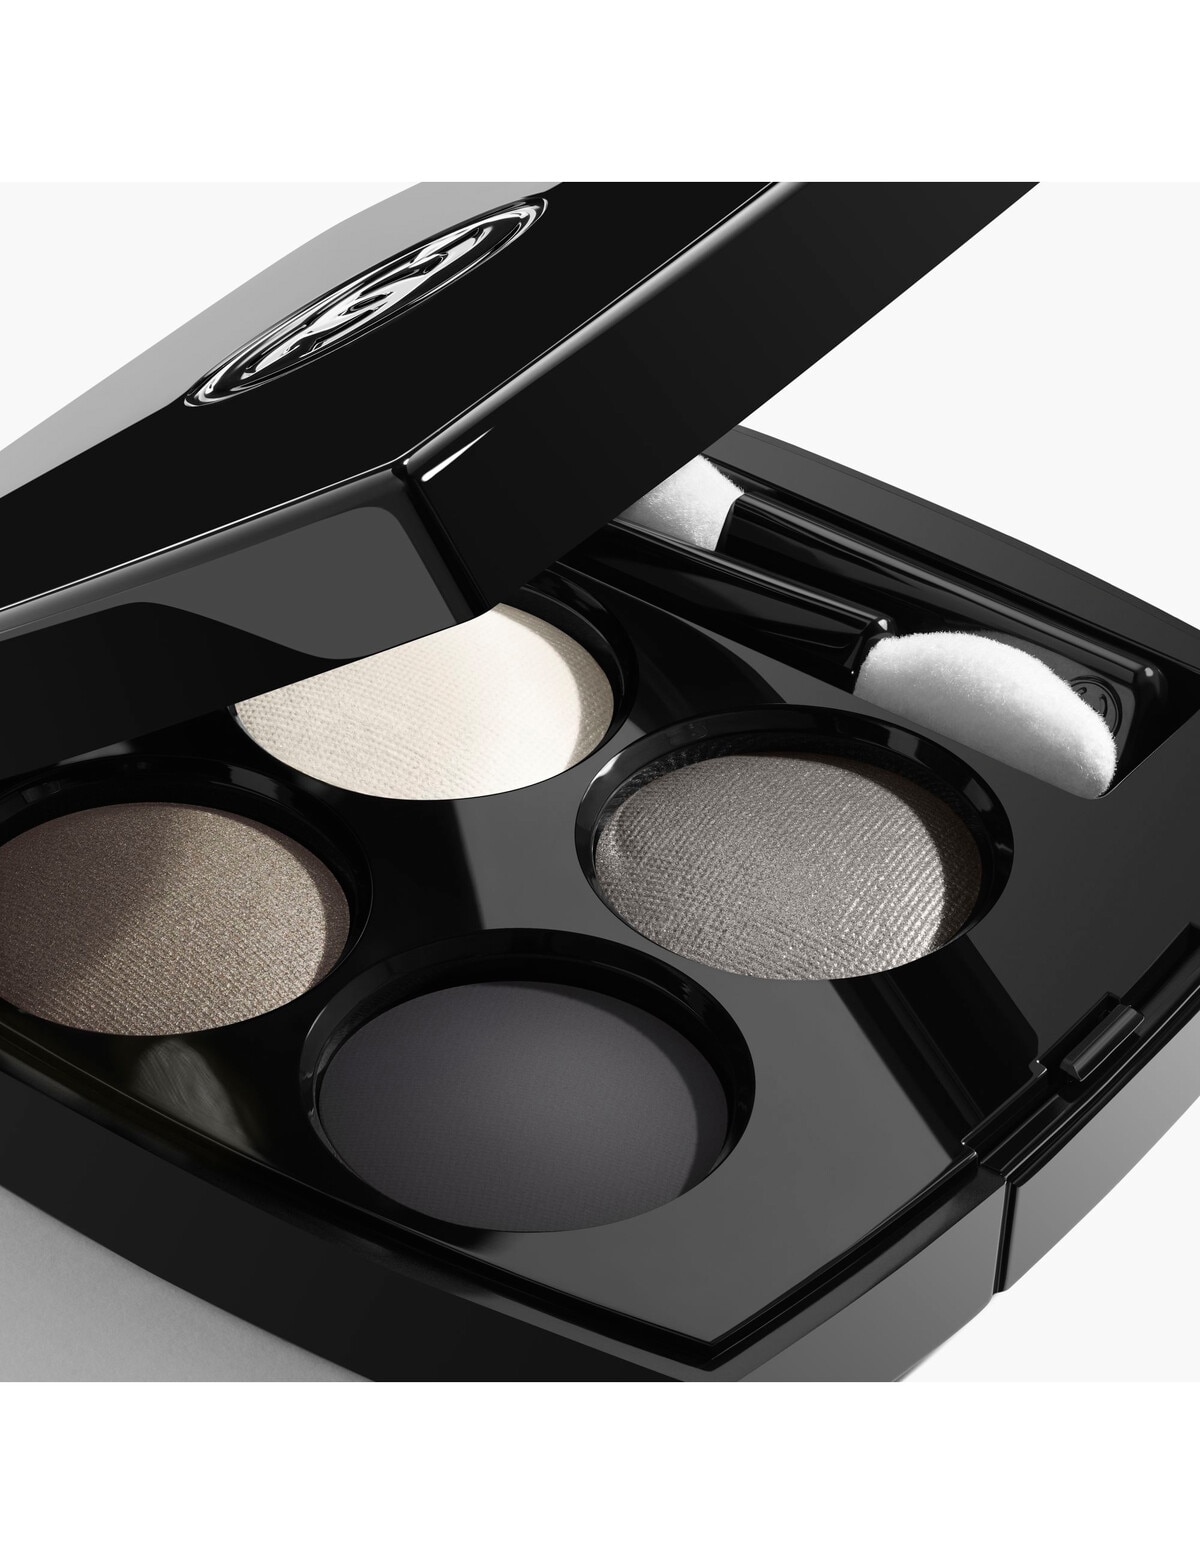 Chanel Elemental (352) Les 4 Ombres Eyeshadow Quad Review & Swatches